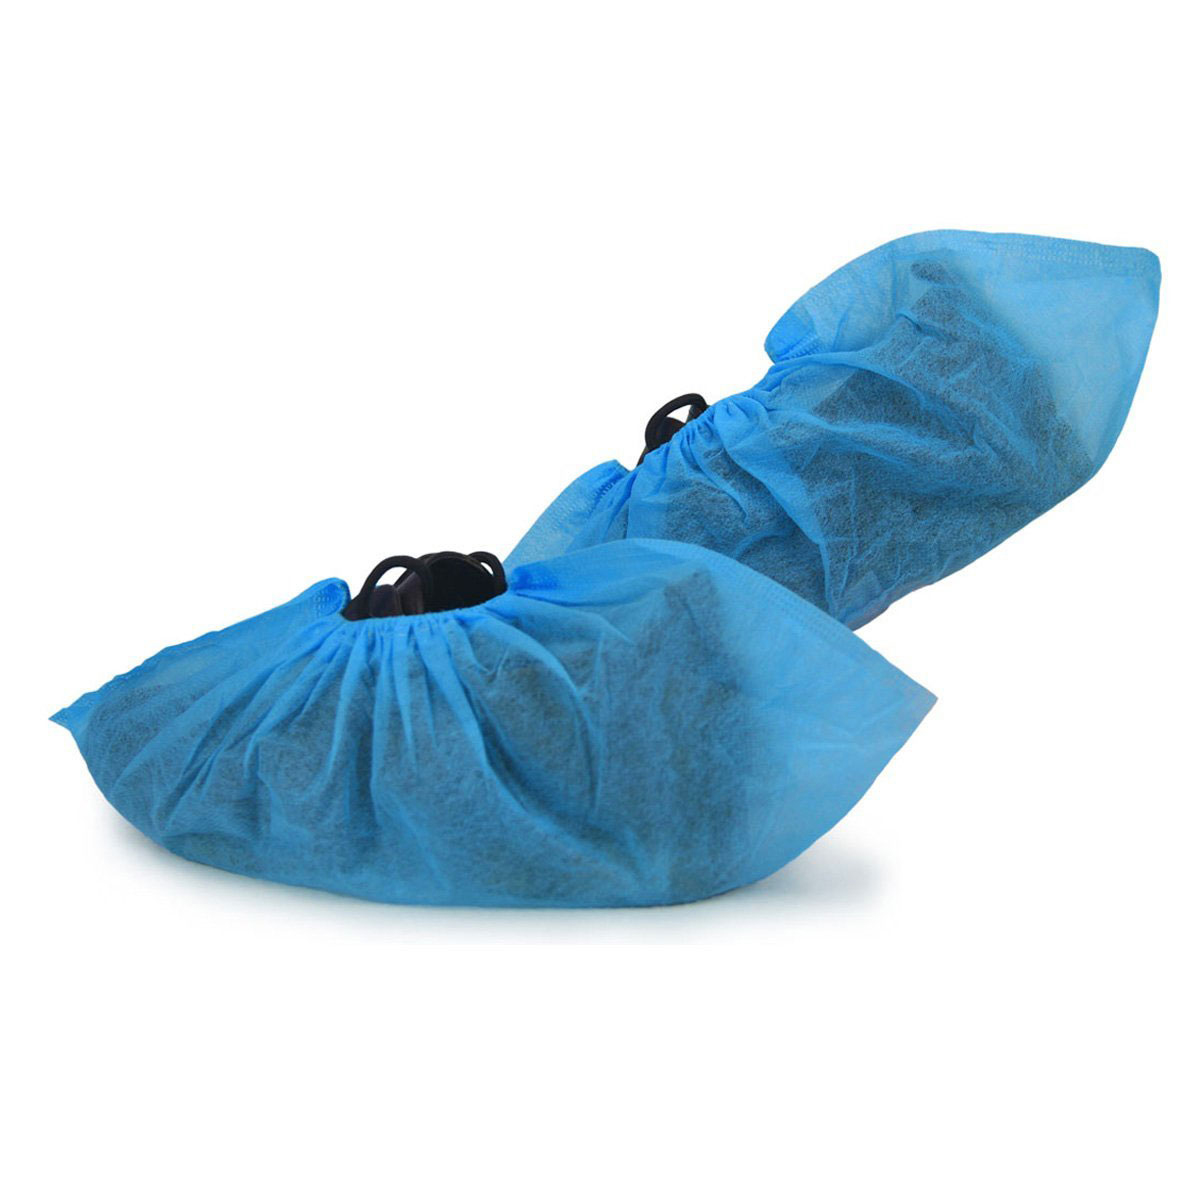 shoe cover for hospital